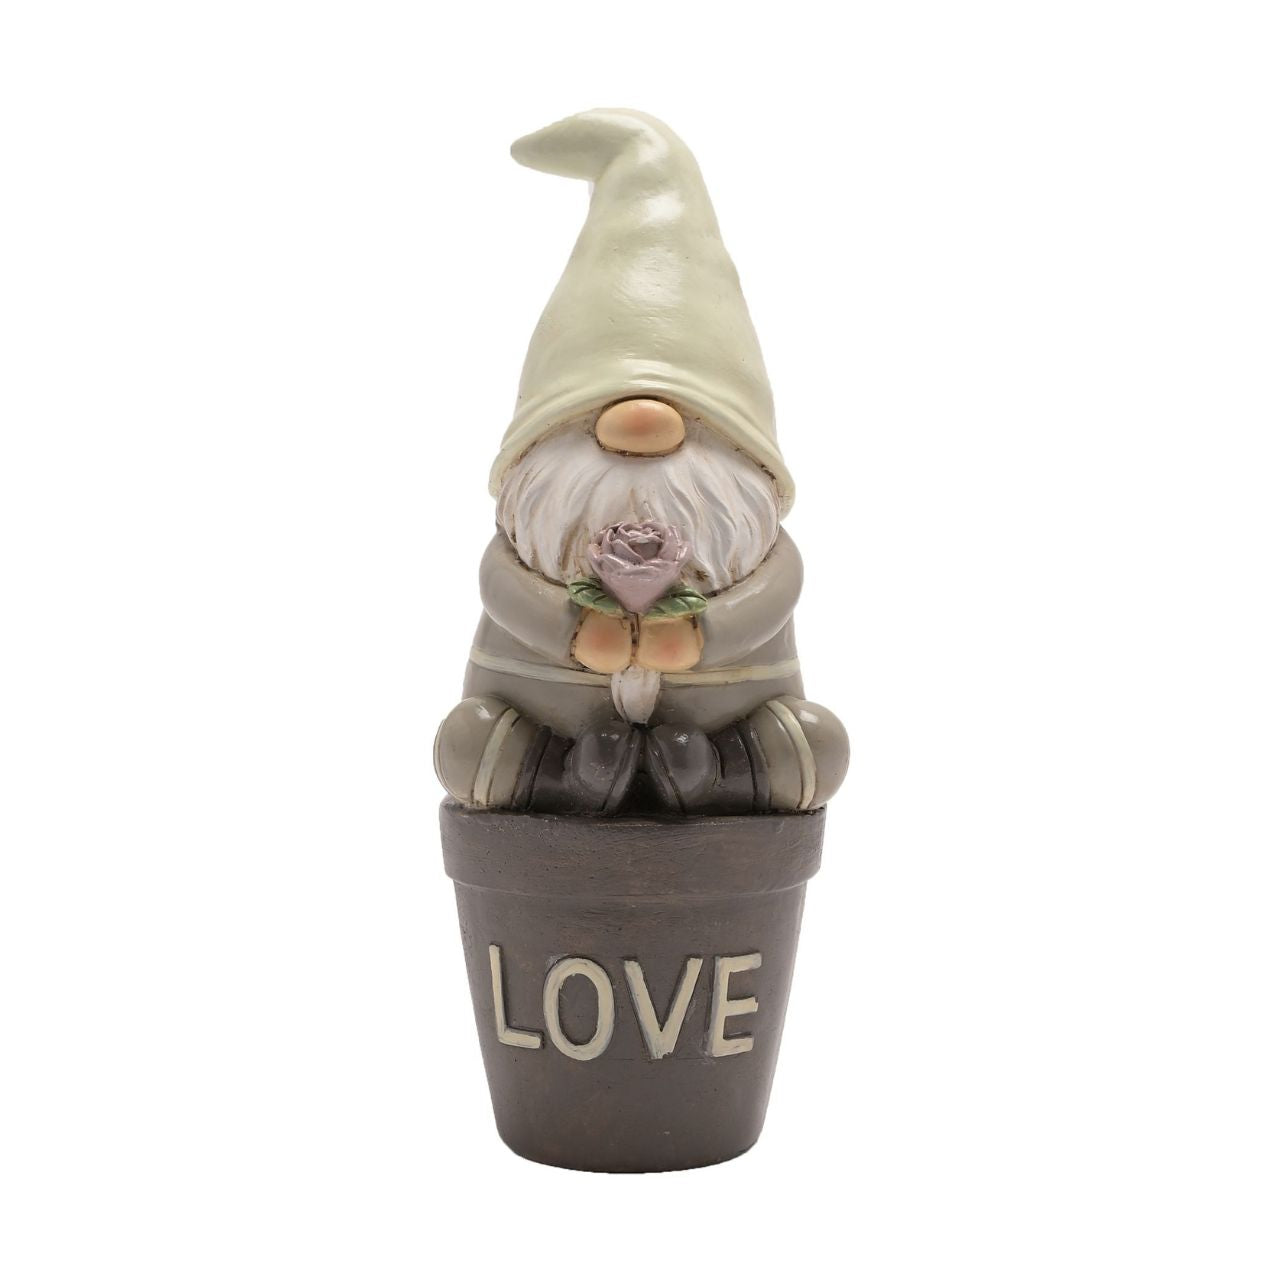 This fun-filled decoration will raise smiles and add character to gardens.  The hand painted resin garden decoration depicts a loveable gonk sitting upon a flowerpot that displays the word ‘Love’ across the front. It showcases beautiful colouring throughout and offers versatile display options around the garden.